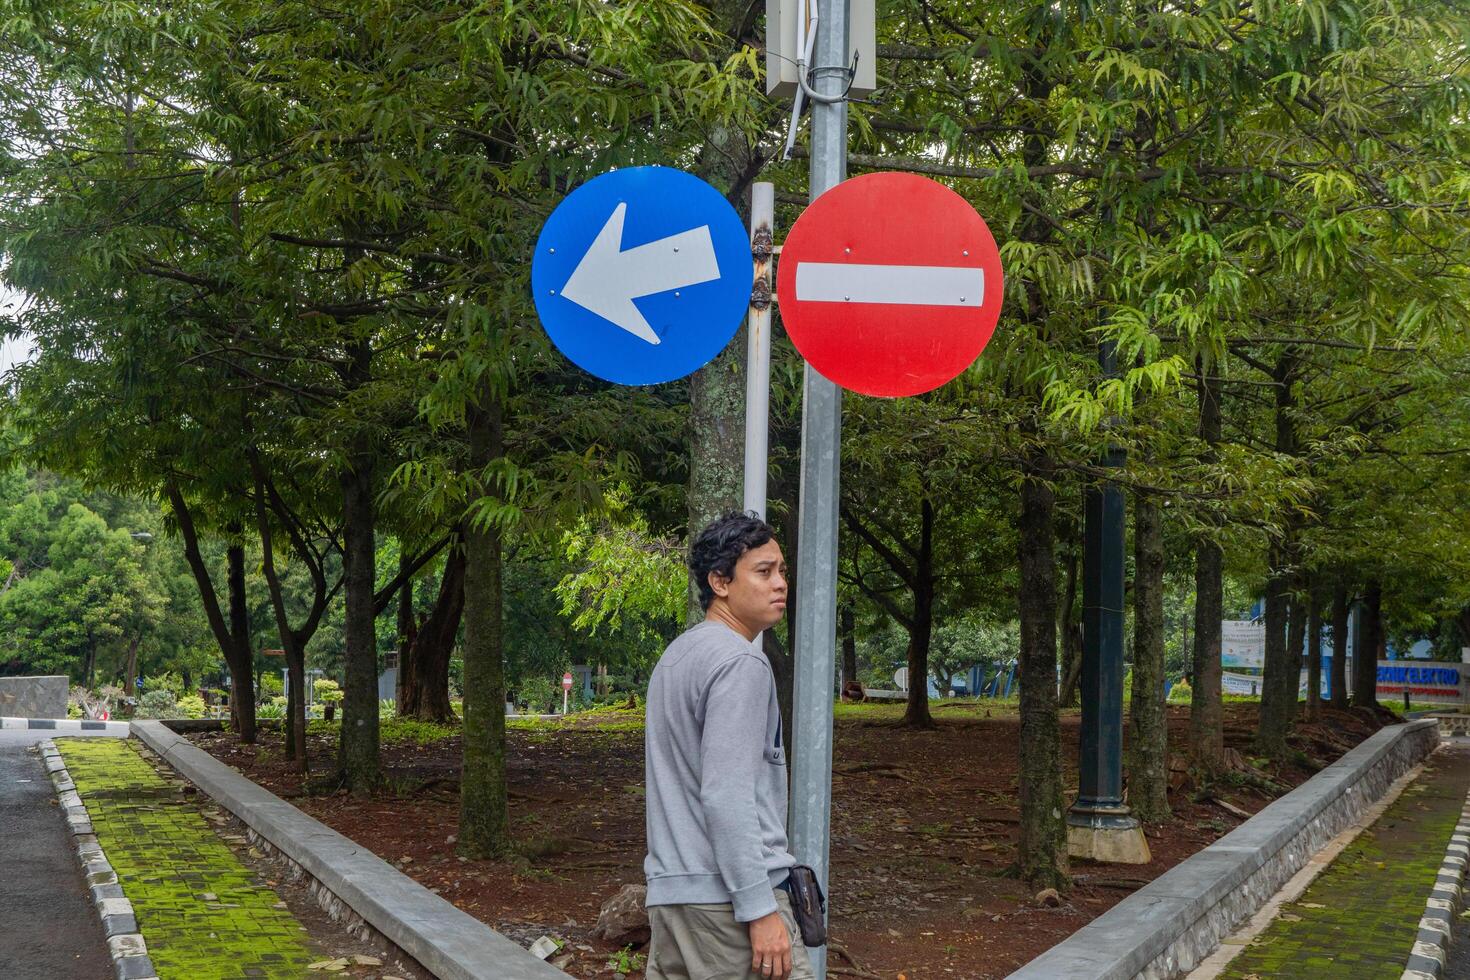 Man look to the sign direction traffic. The photo is suitable to use for adventure and travel destination content media.